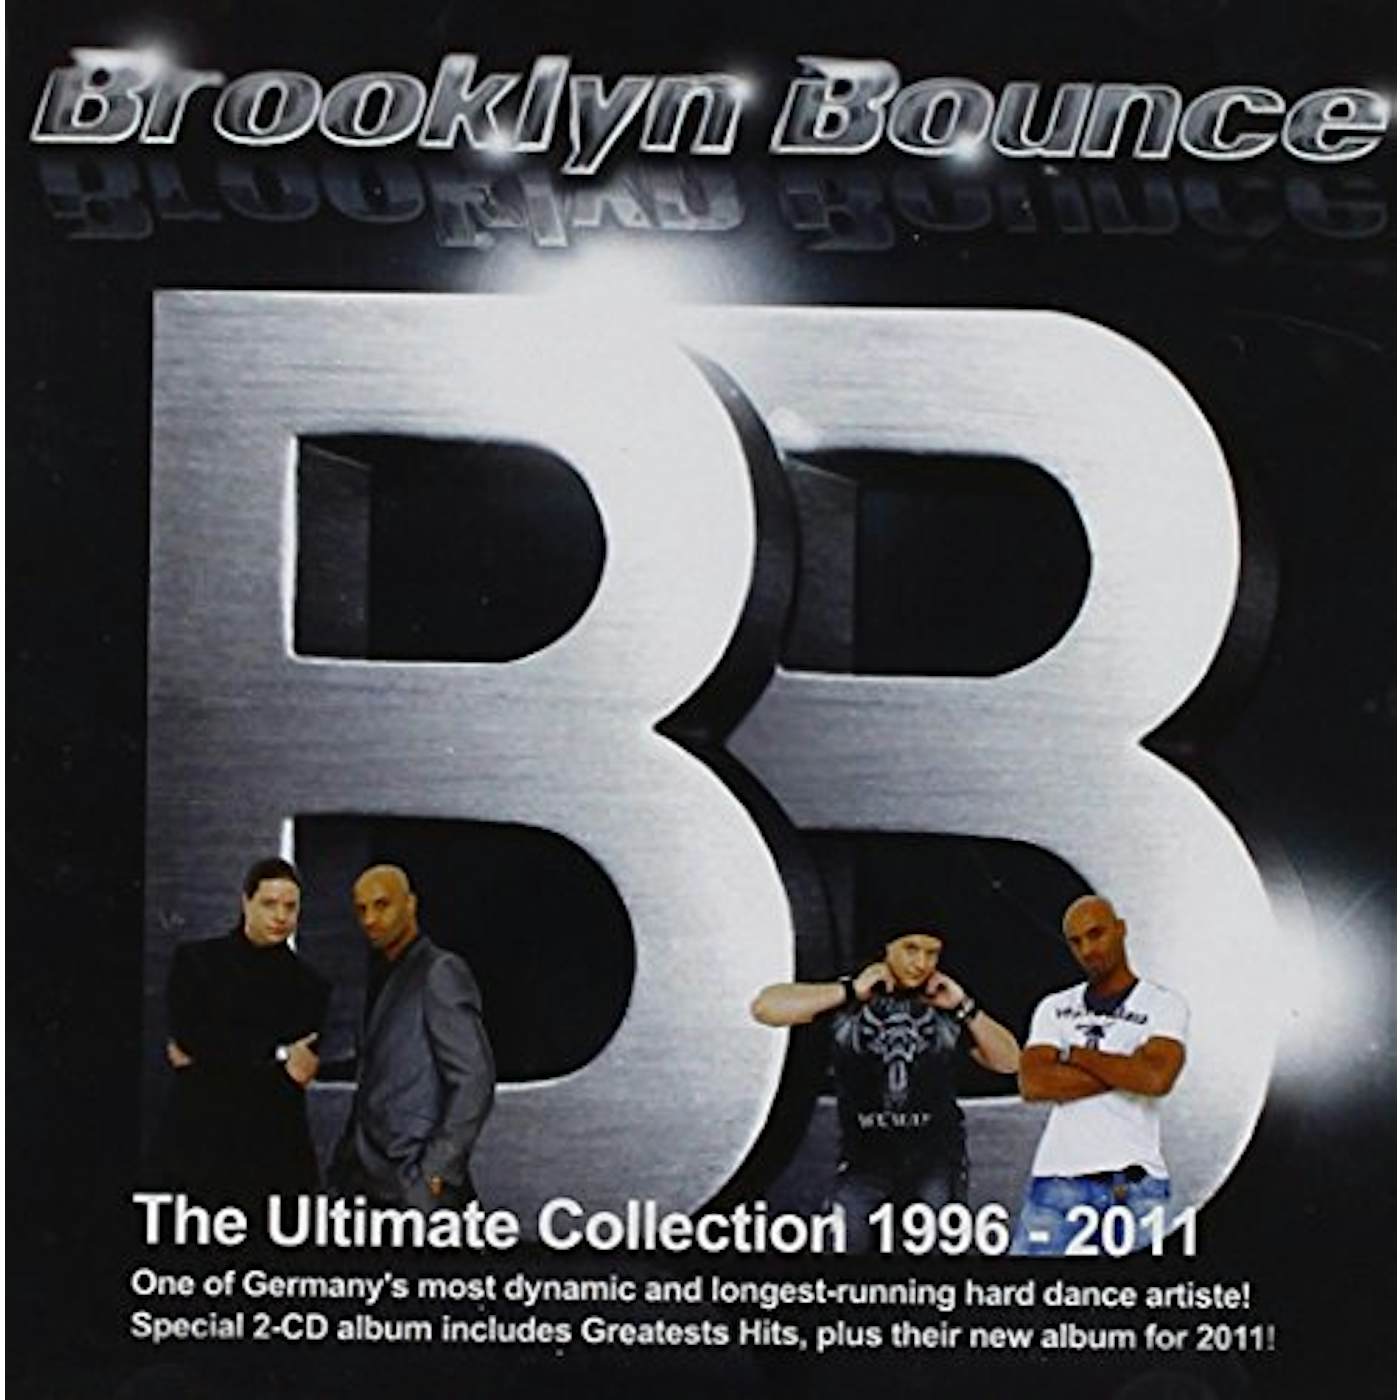 Brooklyn Bounce ULTIMATE COLLECTION 1996 - 2011 CD